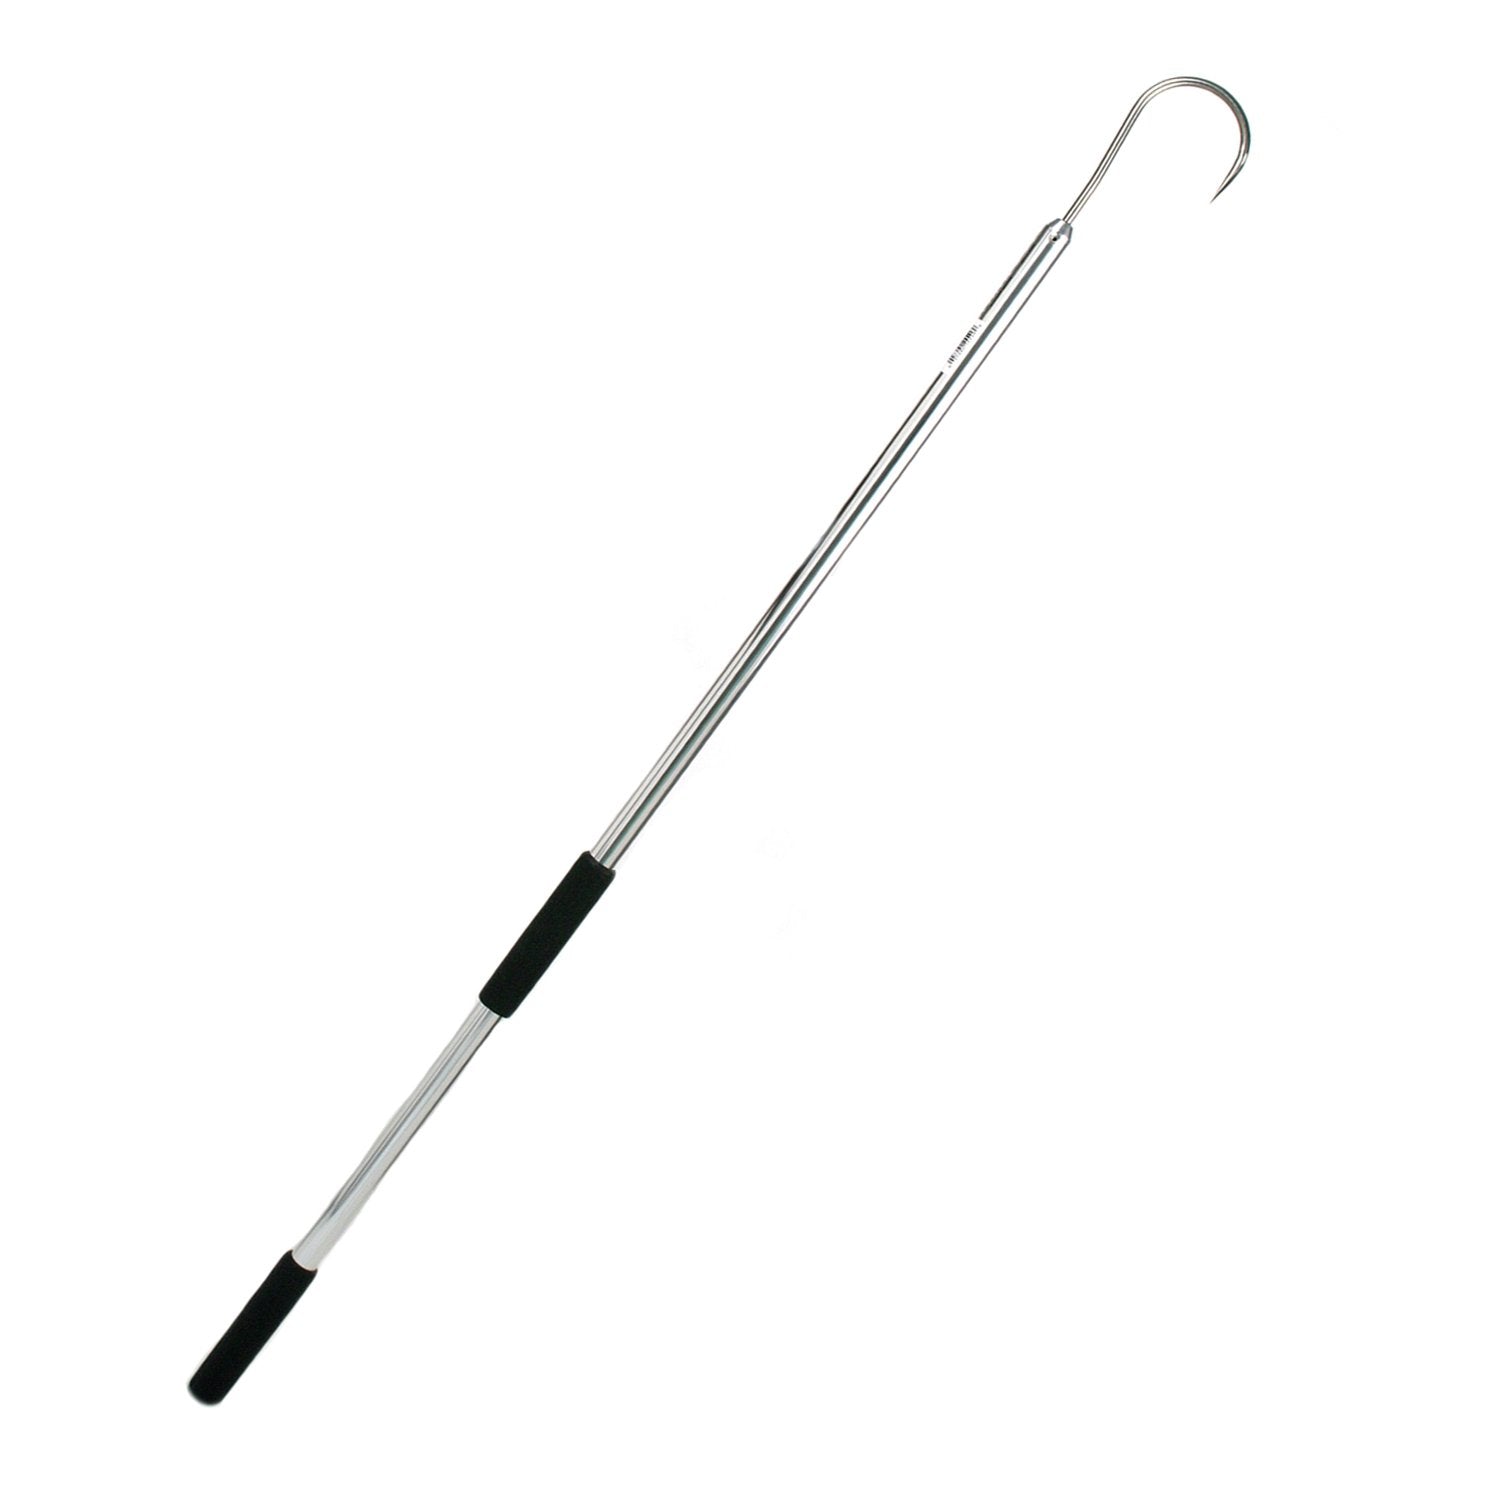 Shurhold 1804 Stainless Steel Fishing Gaff Hook with India